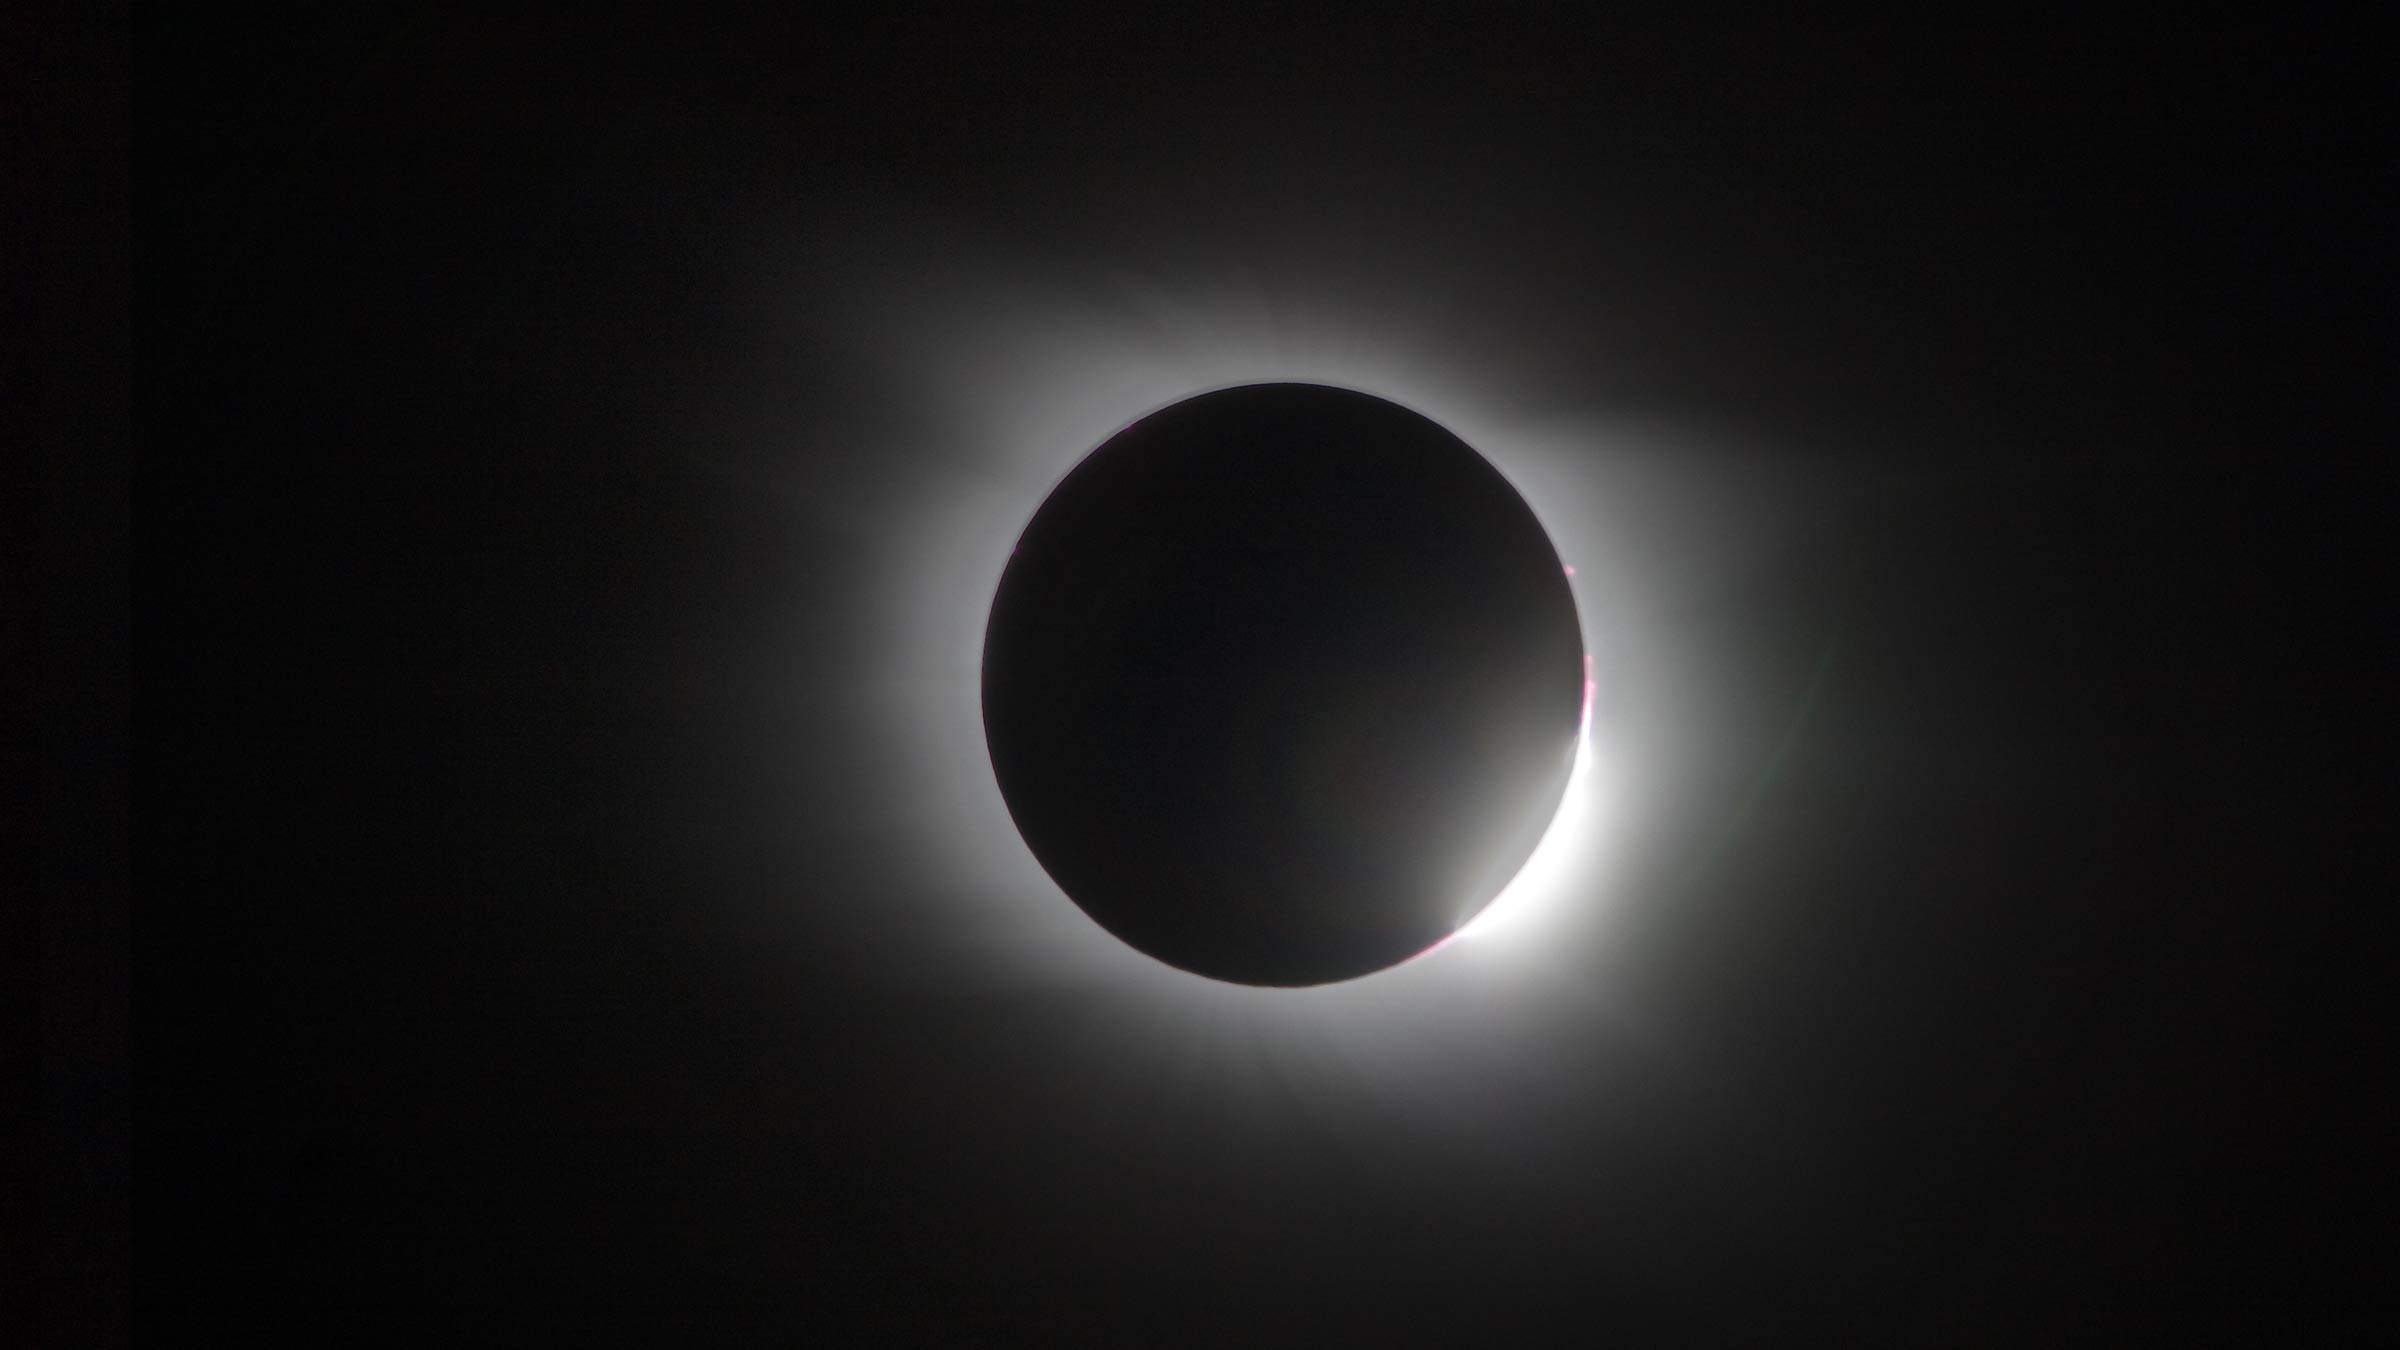 Solar eclipse: How to safely view a total eclipse